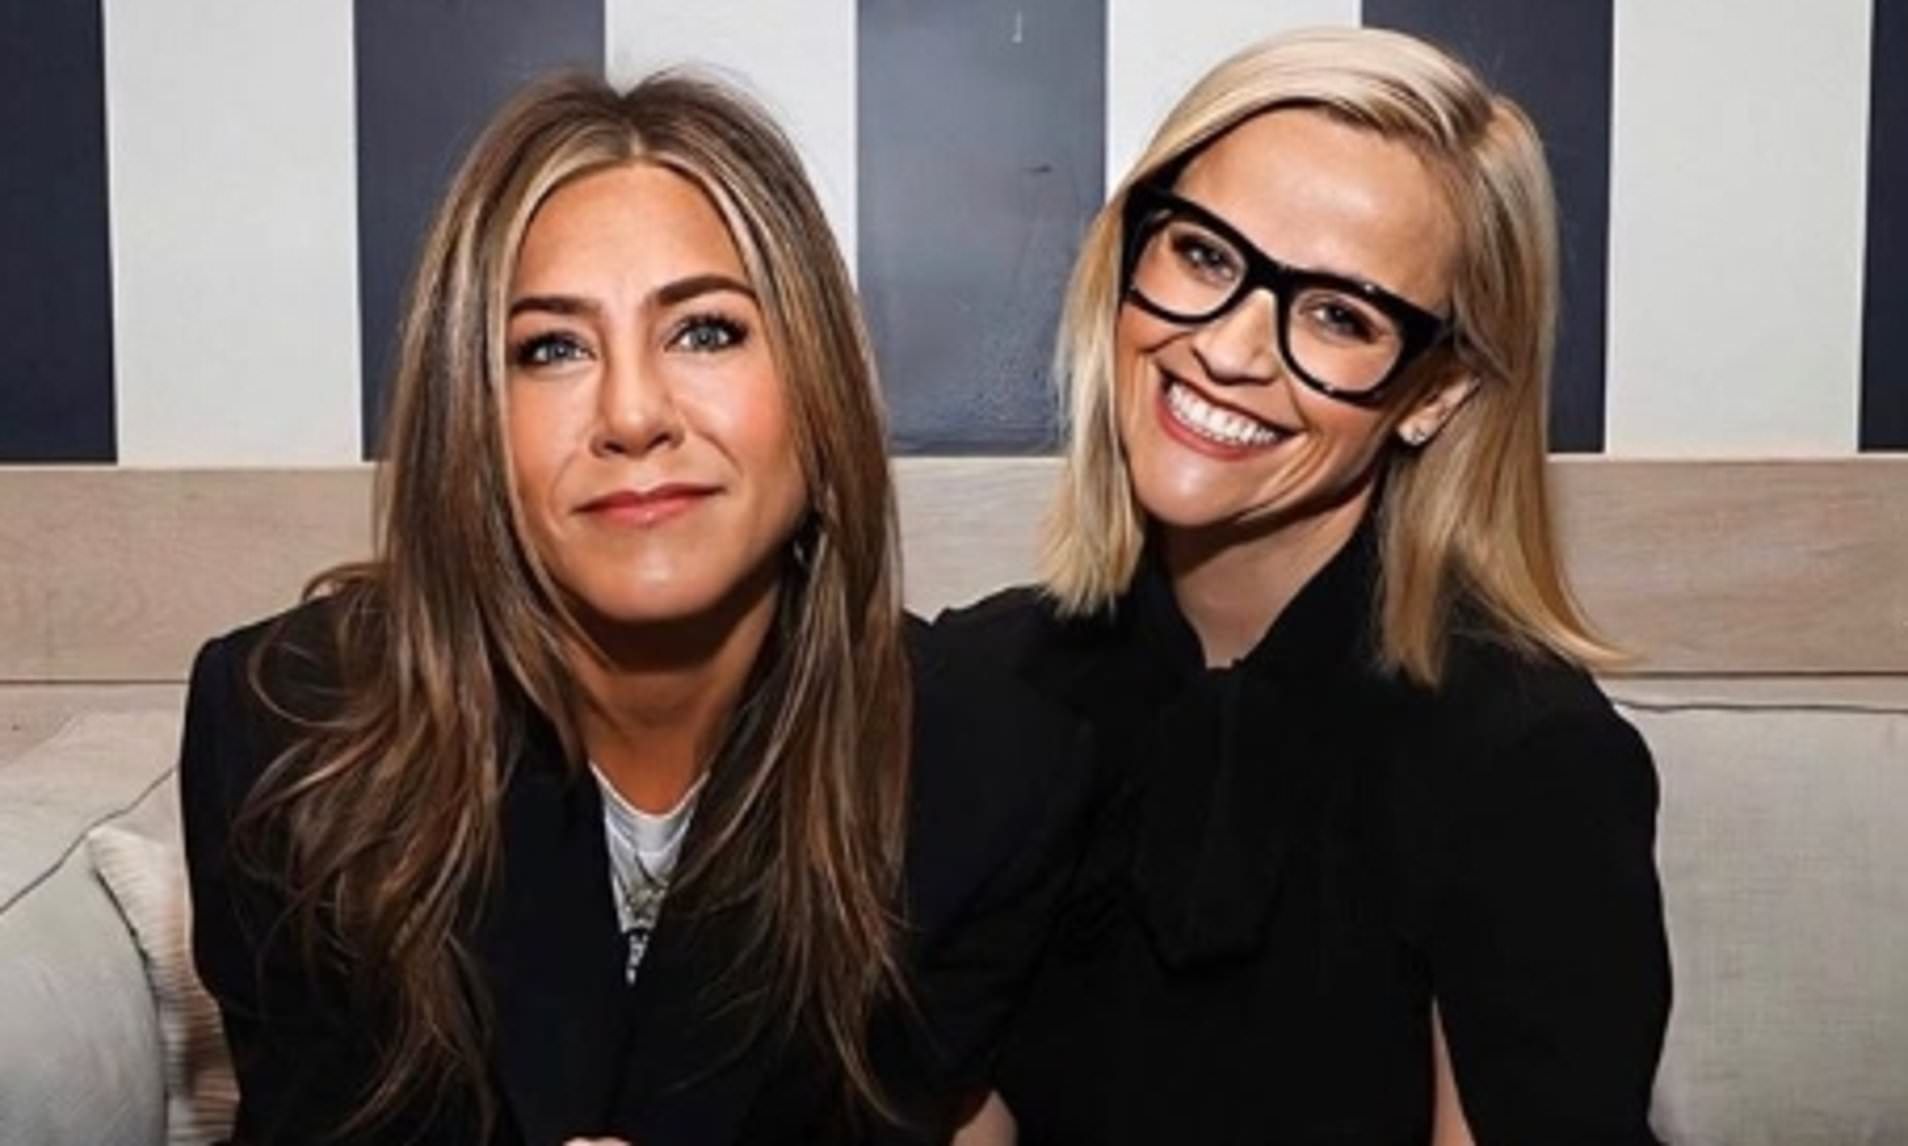 jennifer aniston reese witherspoon friends